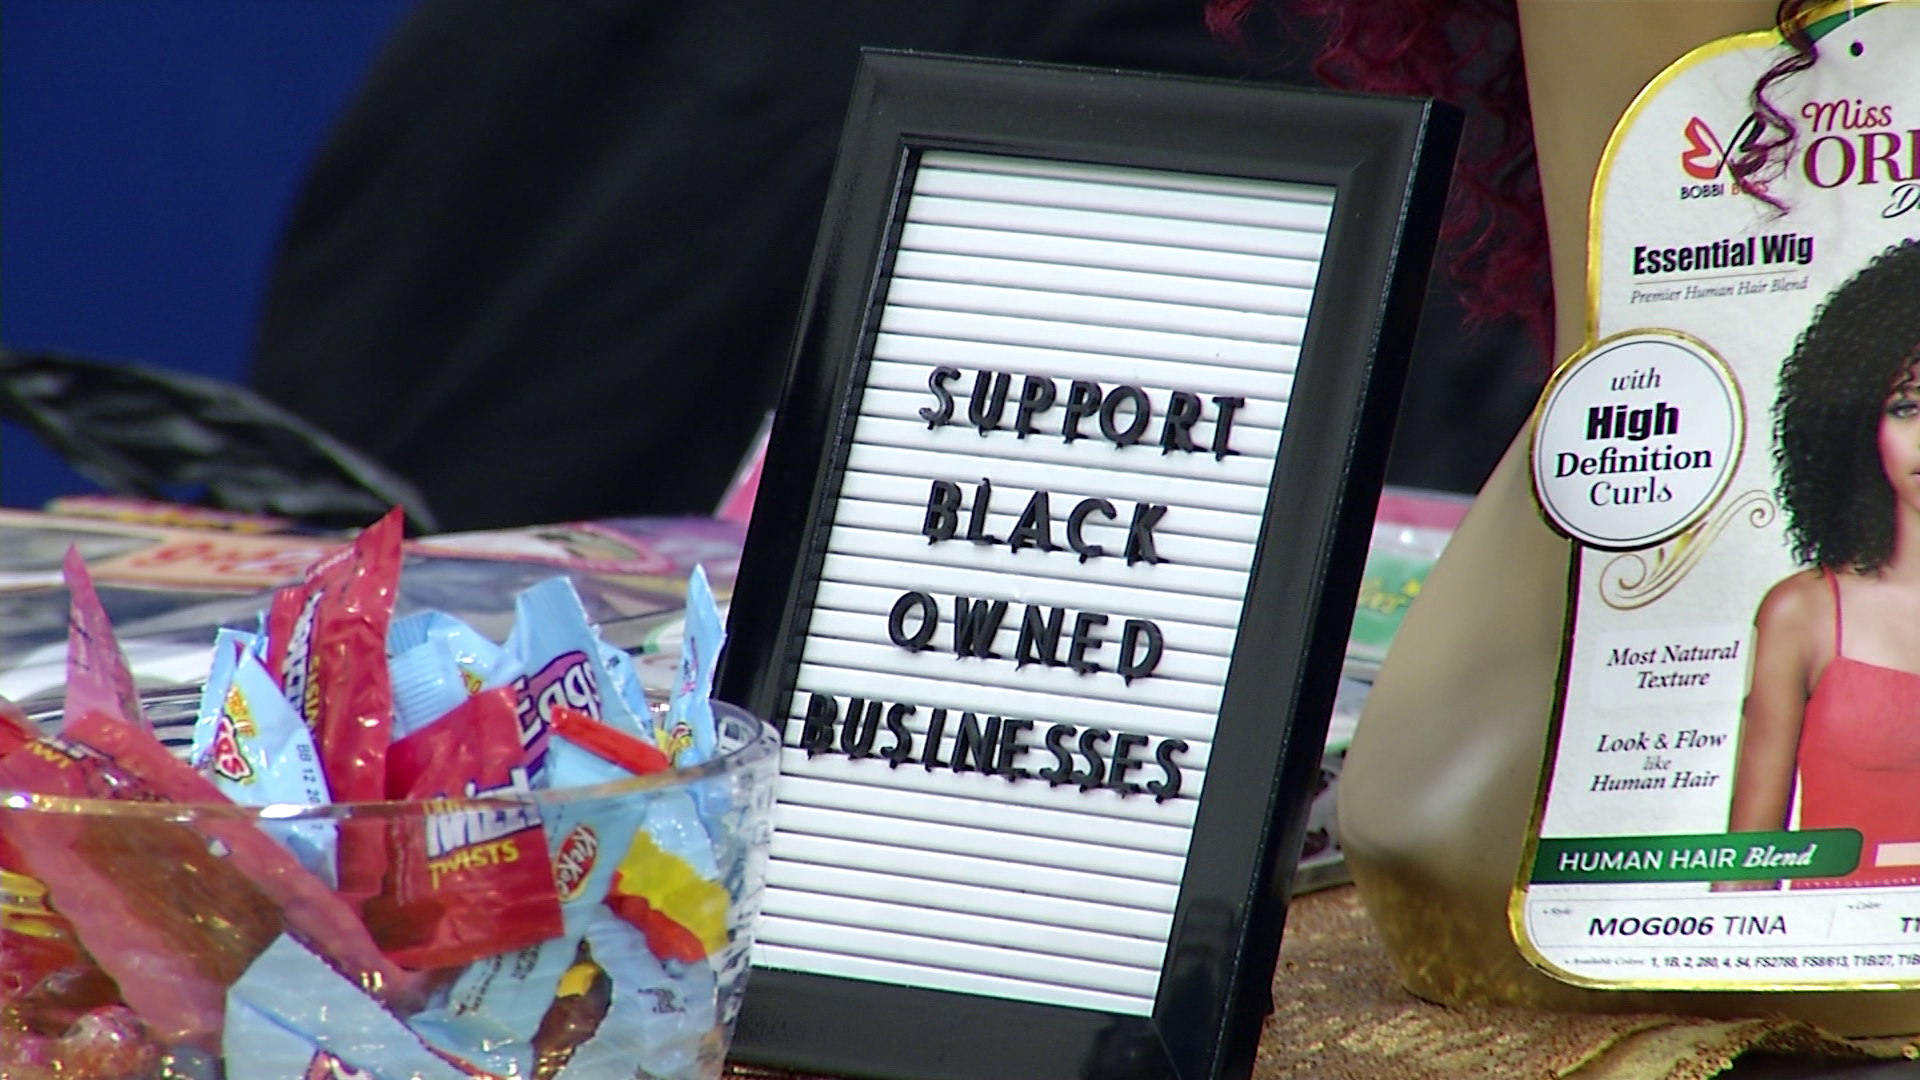 Black Owned Business Sign.